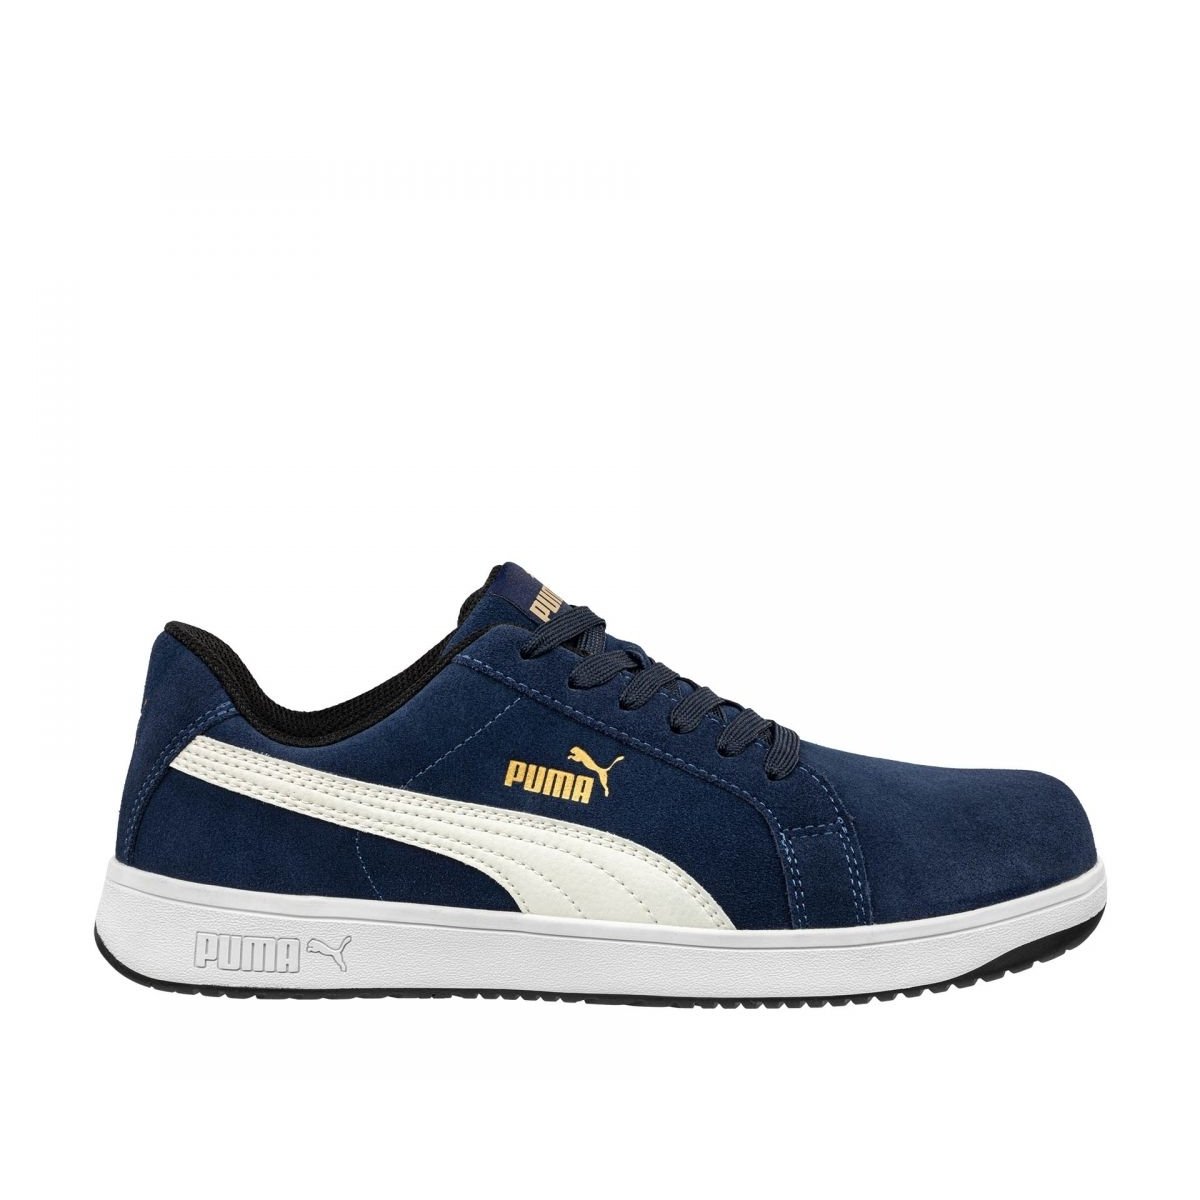 PUMA Safety Men's Iconic Low Composite Toe EH Work Shoes Navy Suede - 640025 ONE SIZE Navy - Navy, 9